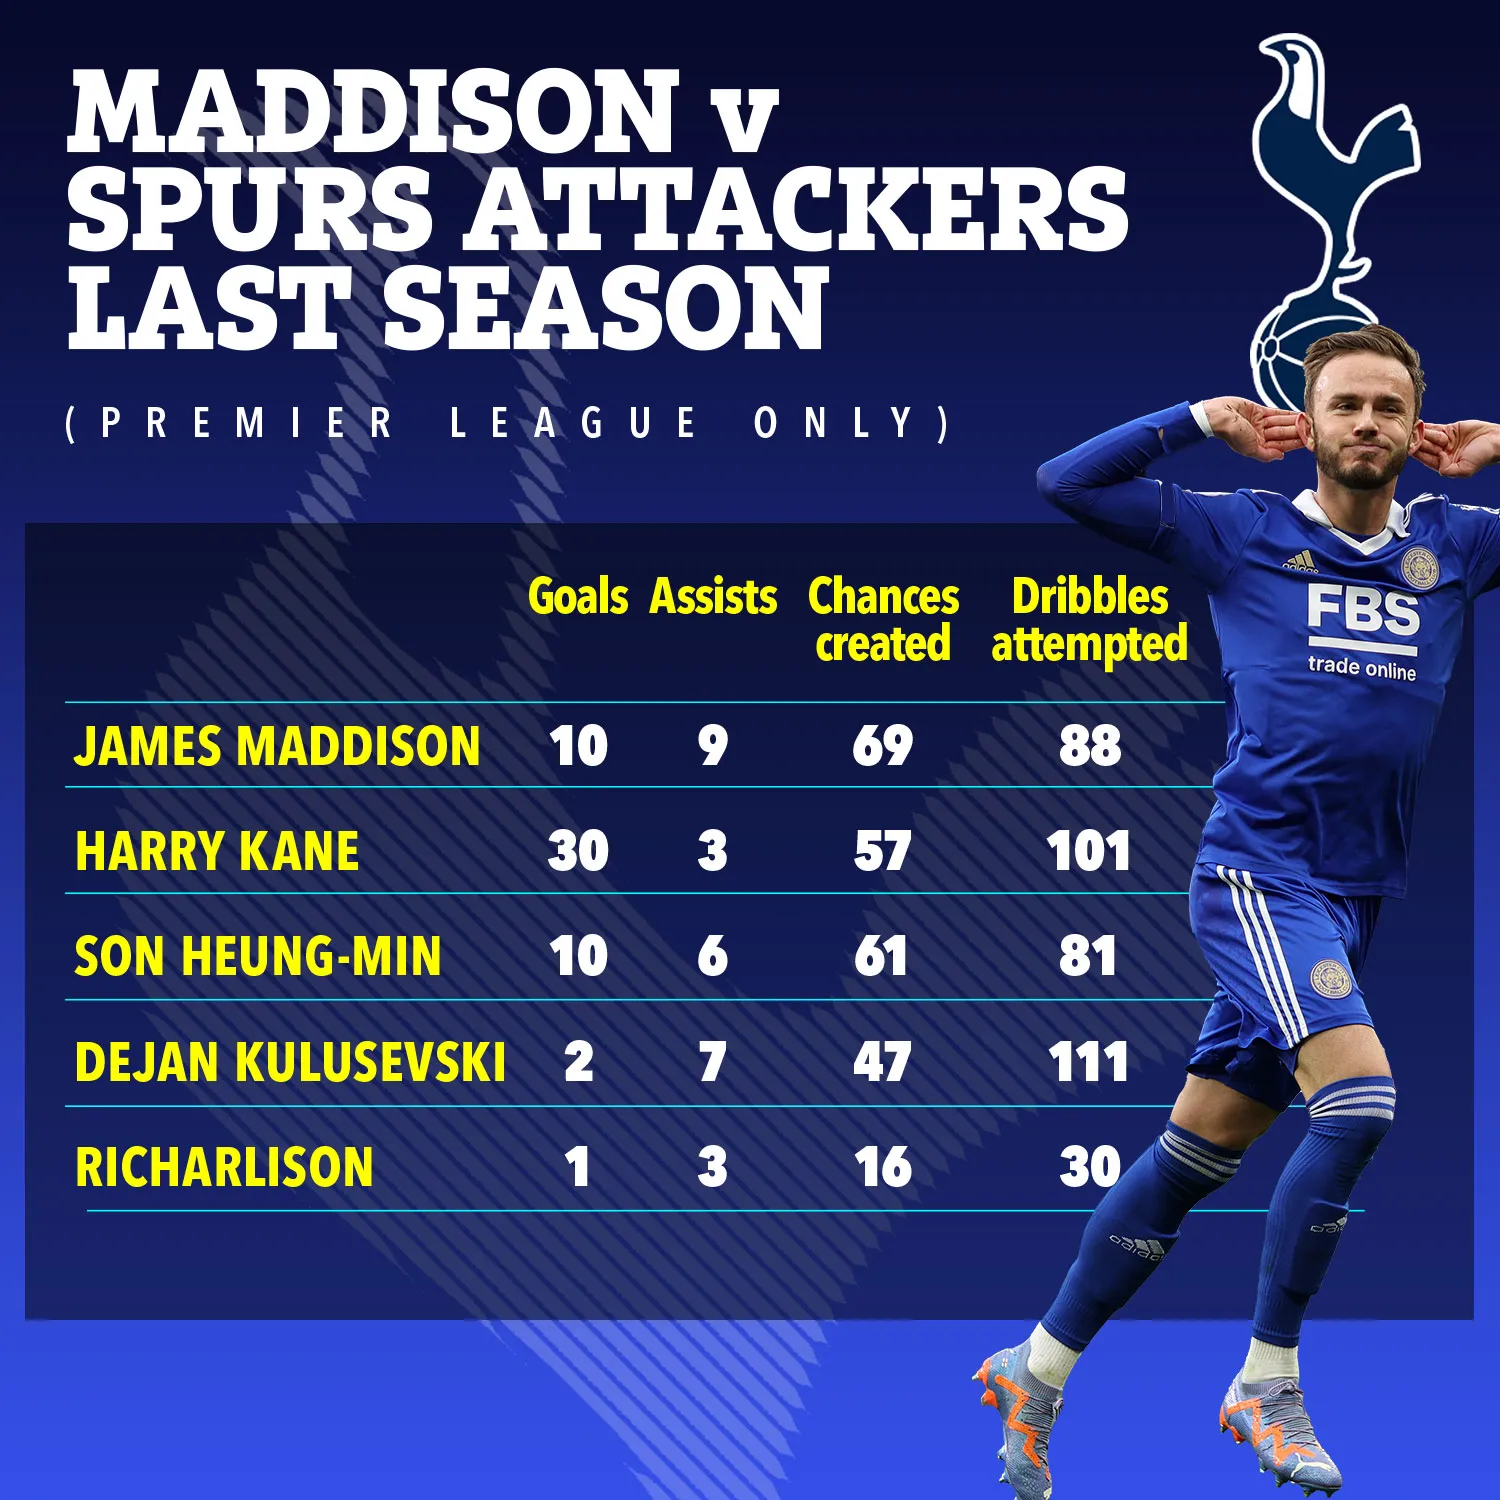 Maddison was outstanding against Burnley